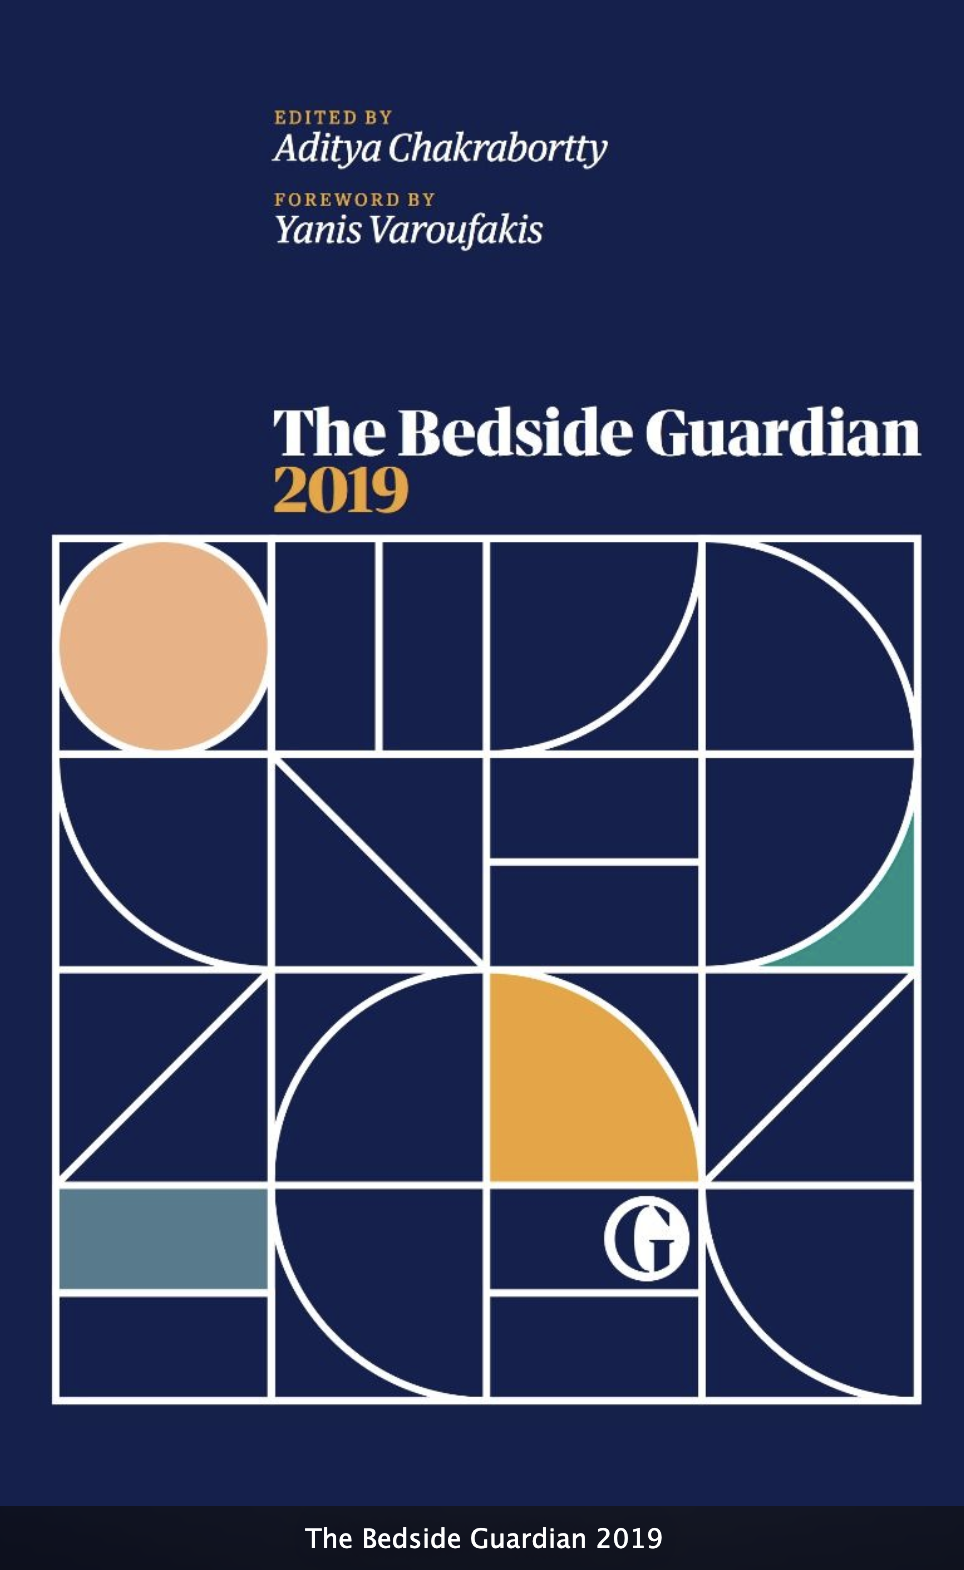 Reflections on 2019 – my foreword in THE GUARDIAN BEDSIDE 2019